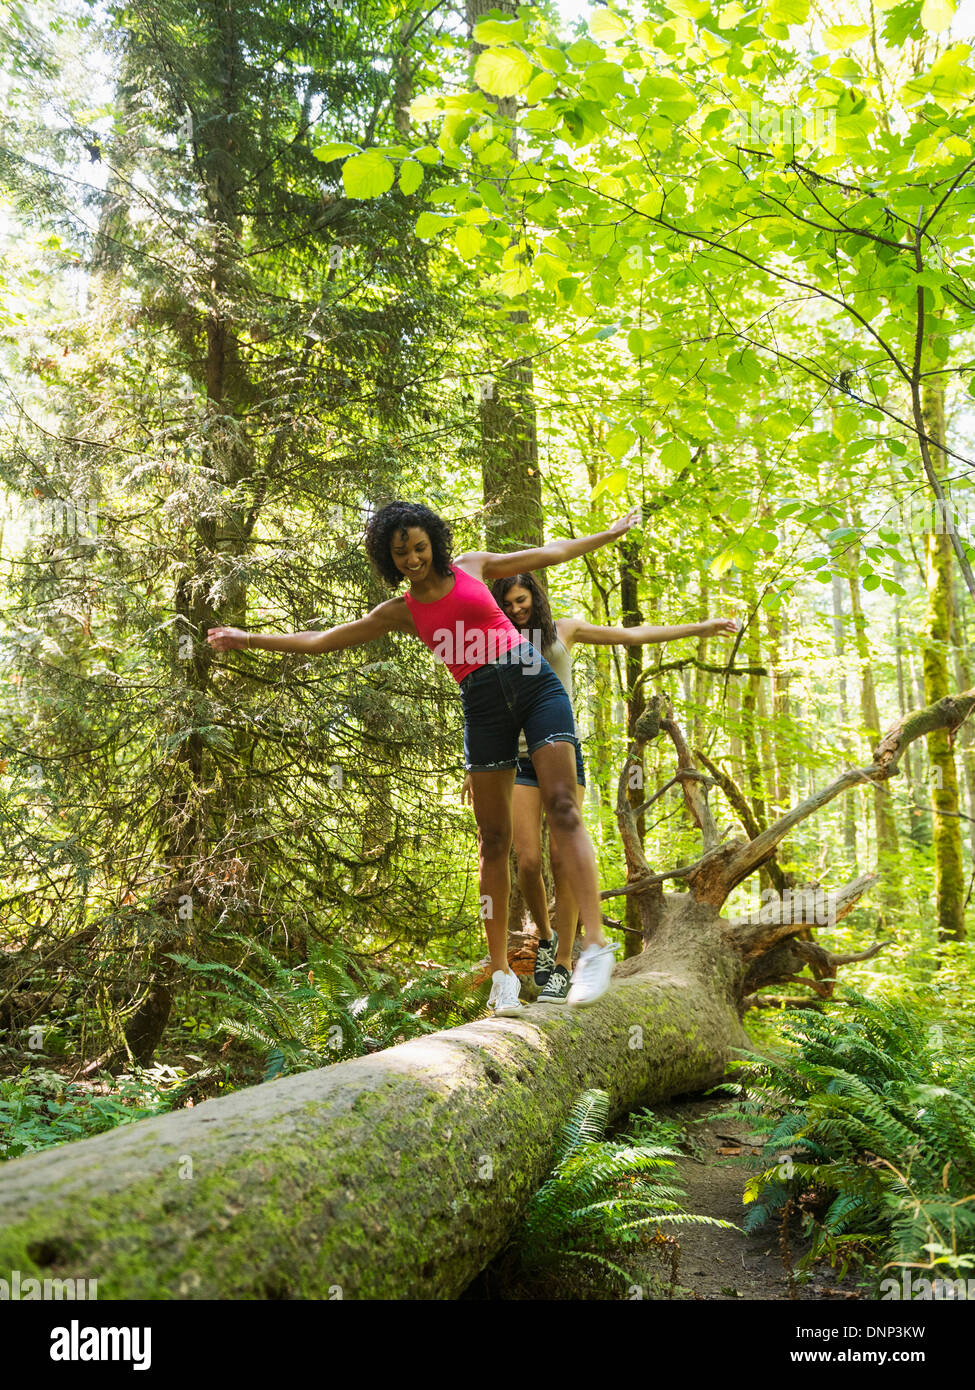 USA, Oregon, Portland, Two young women walking on log in forest Stock Photo